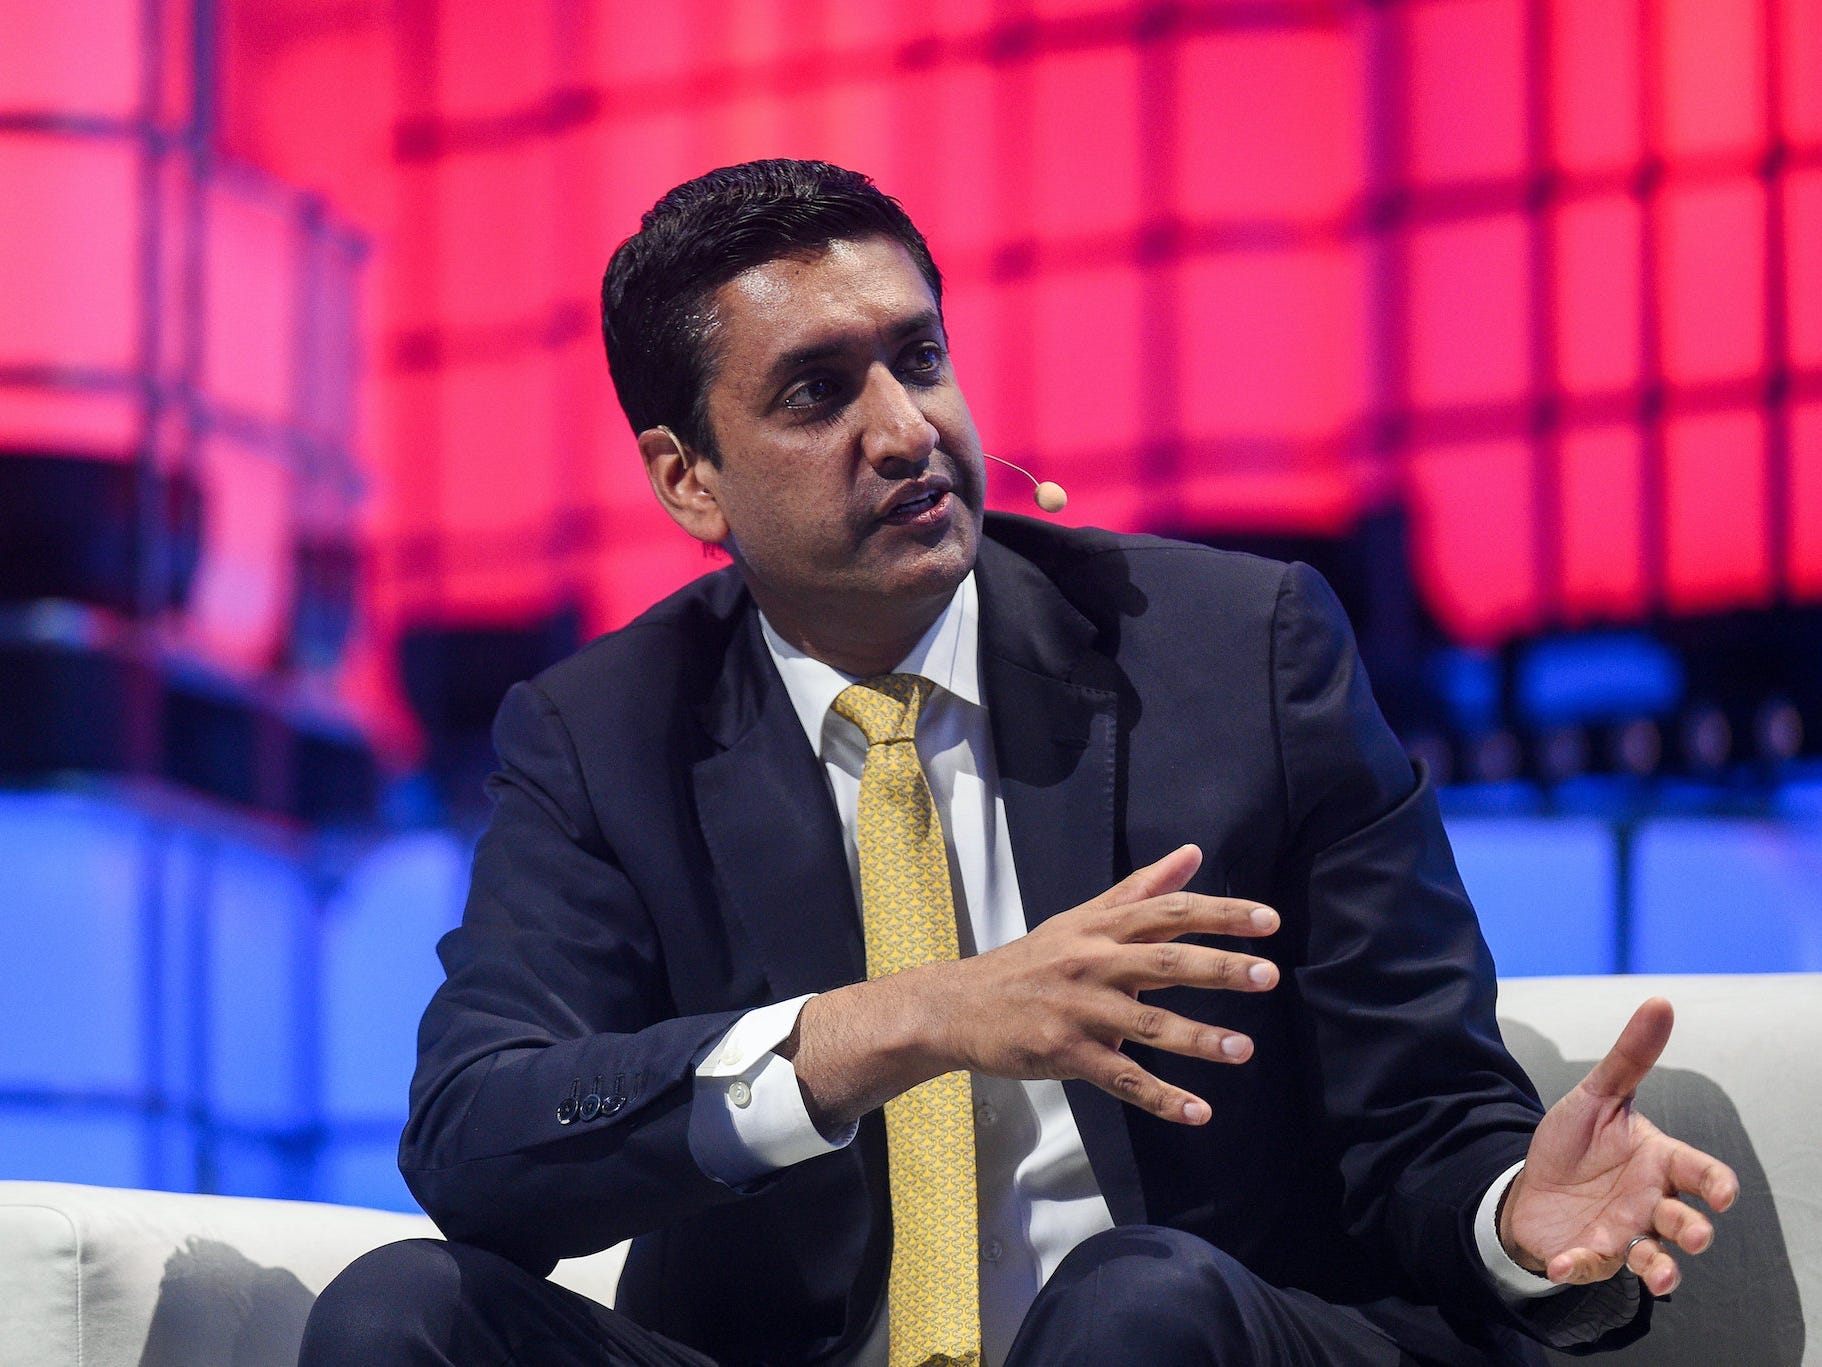 Ro Khanna speaking at the Web Summit 2019 conference.